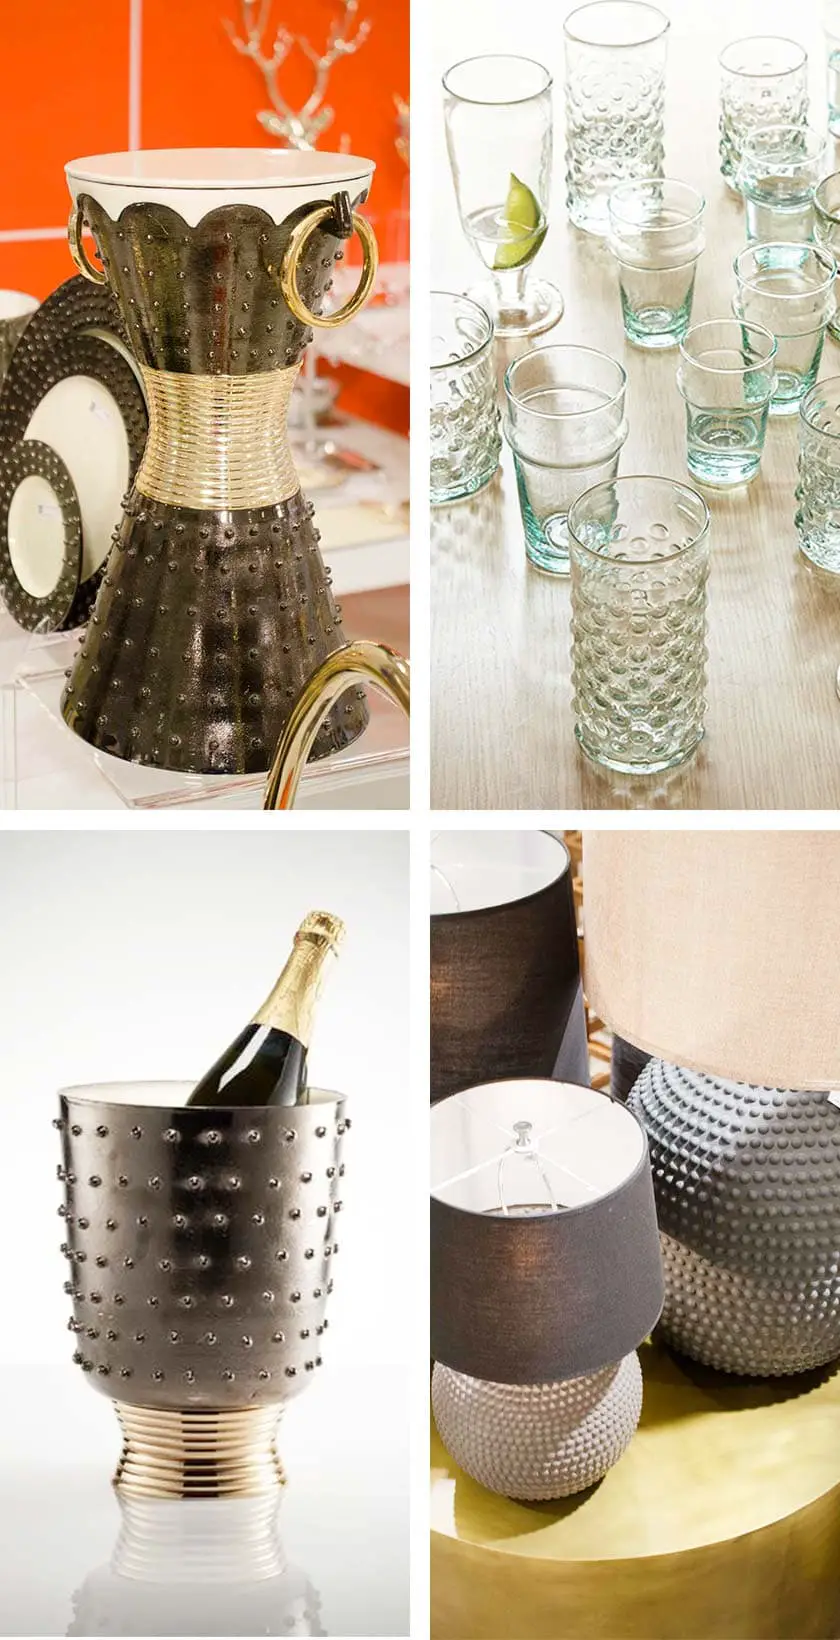 Hobnail design trend from AmericasMart on Thou Swell @thouswellblog